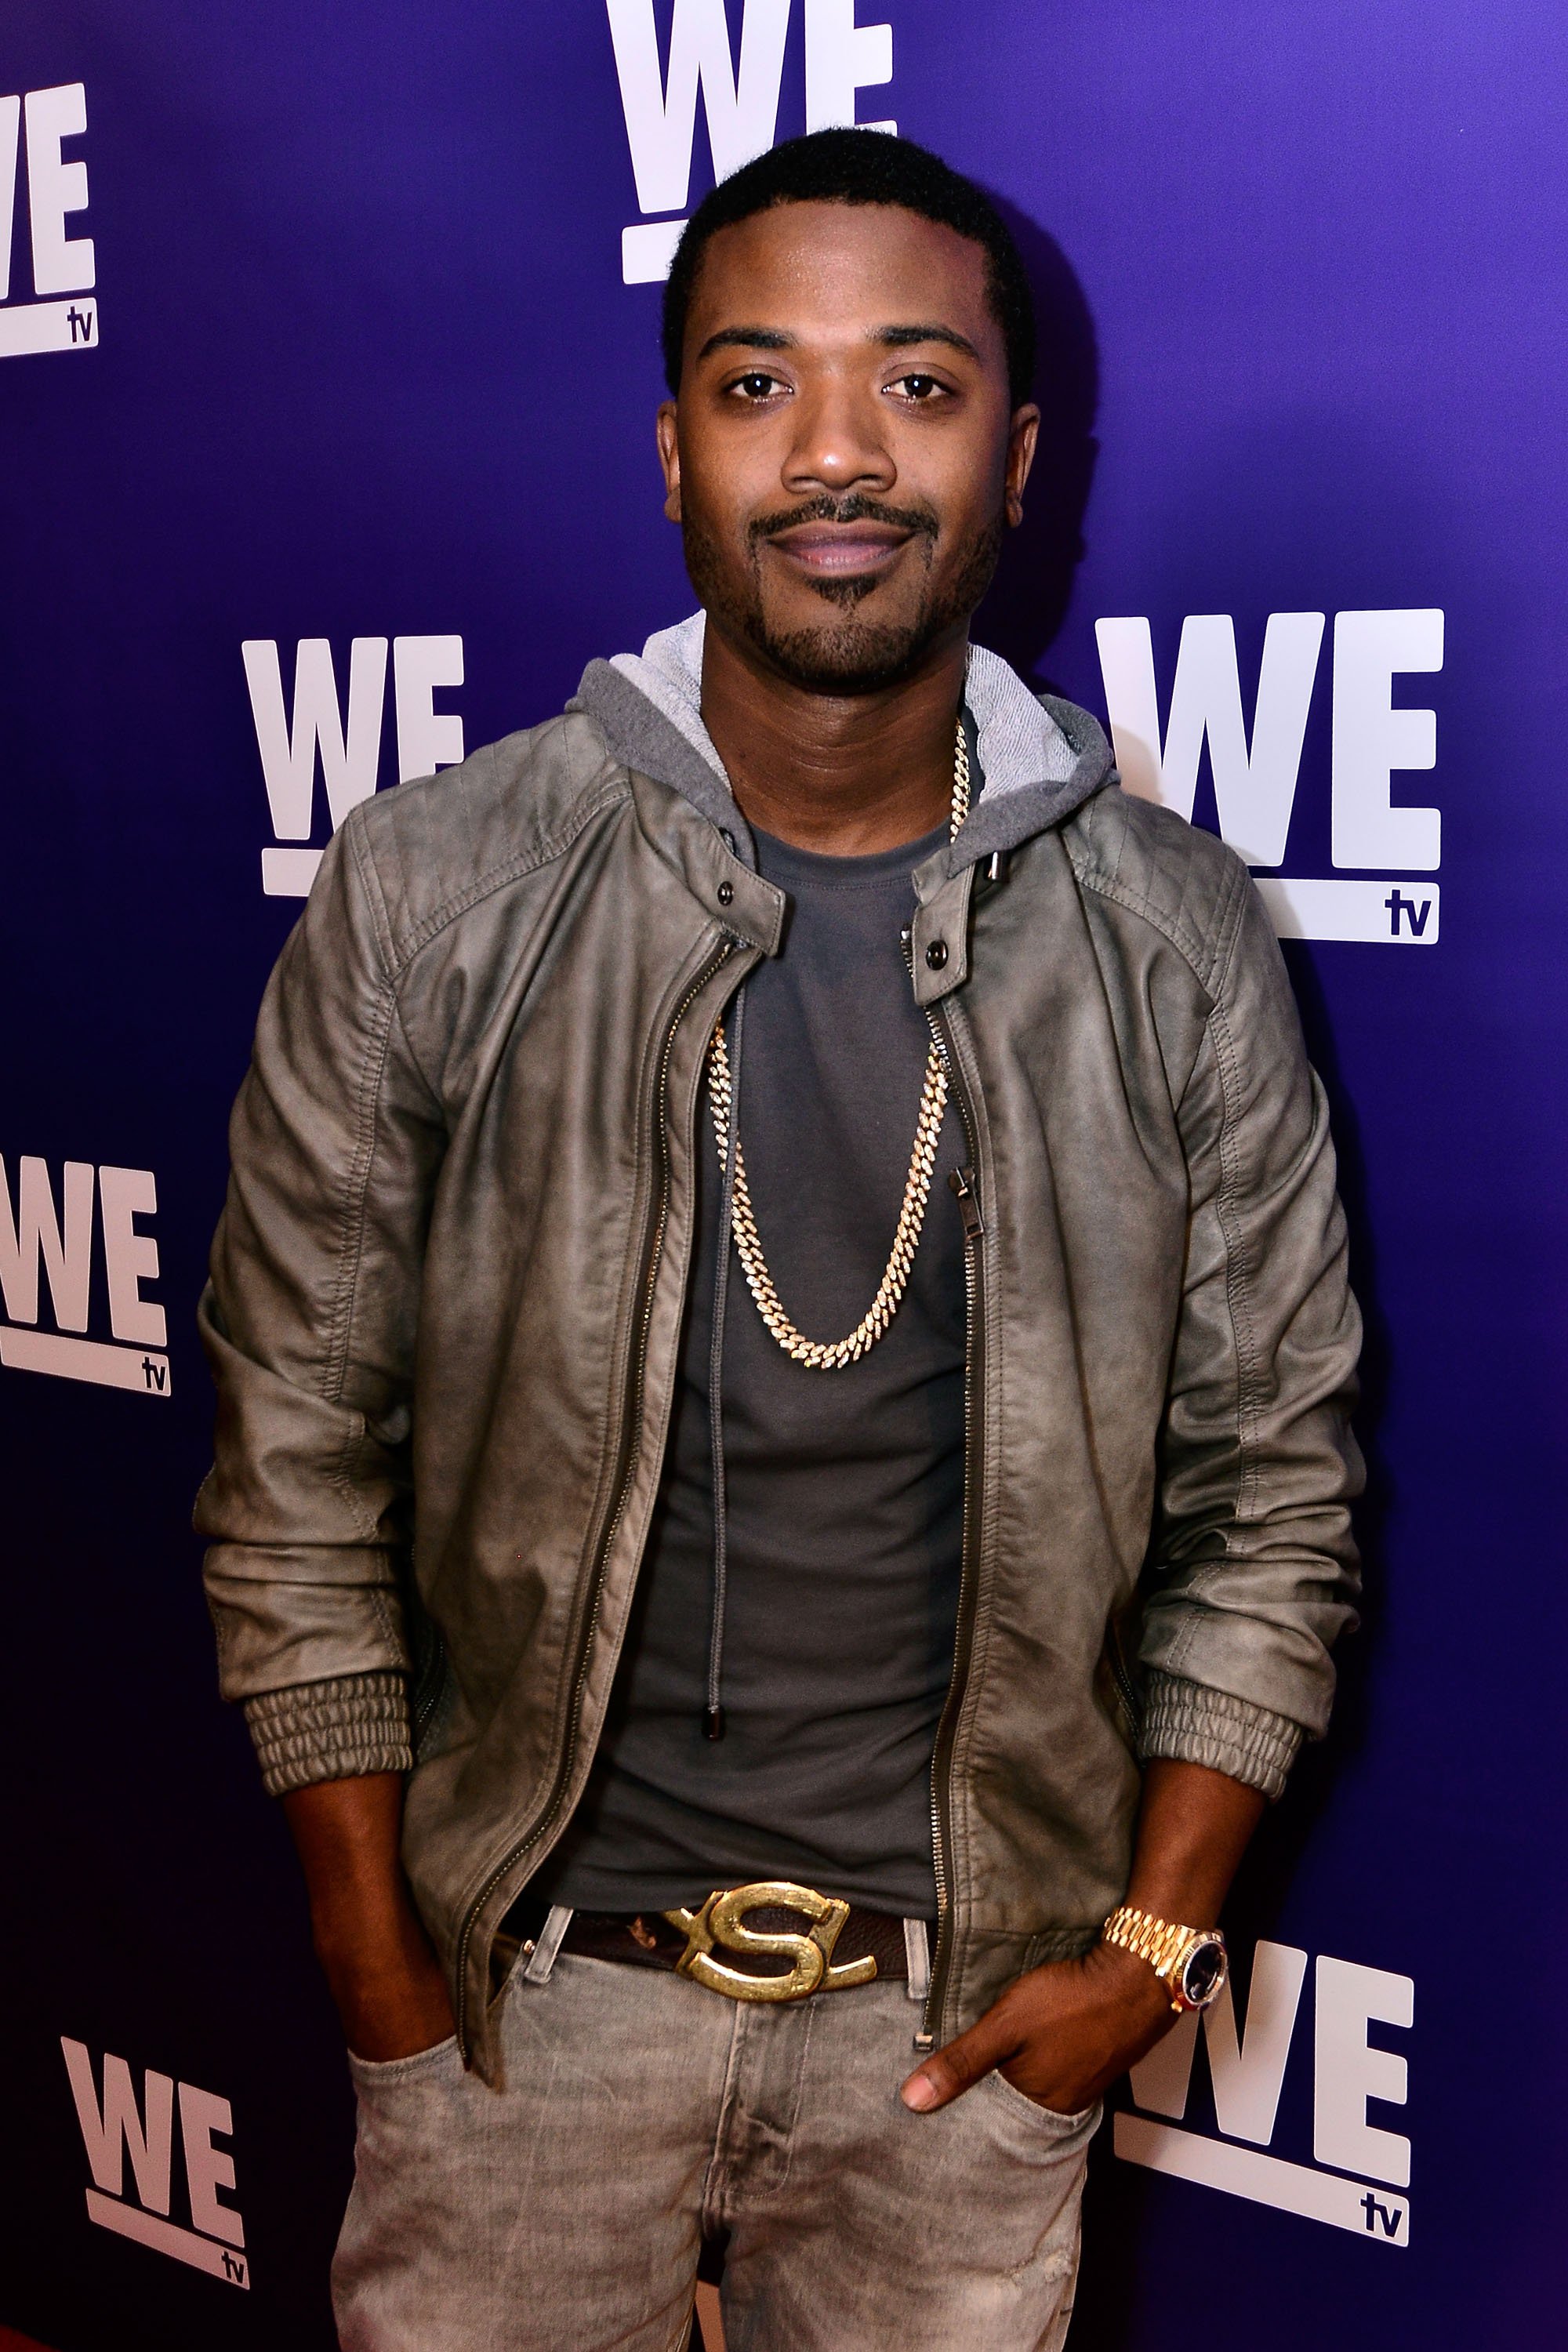 Ray J attending a WE Tv event in March 2015. | Photo: Getty Images